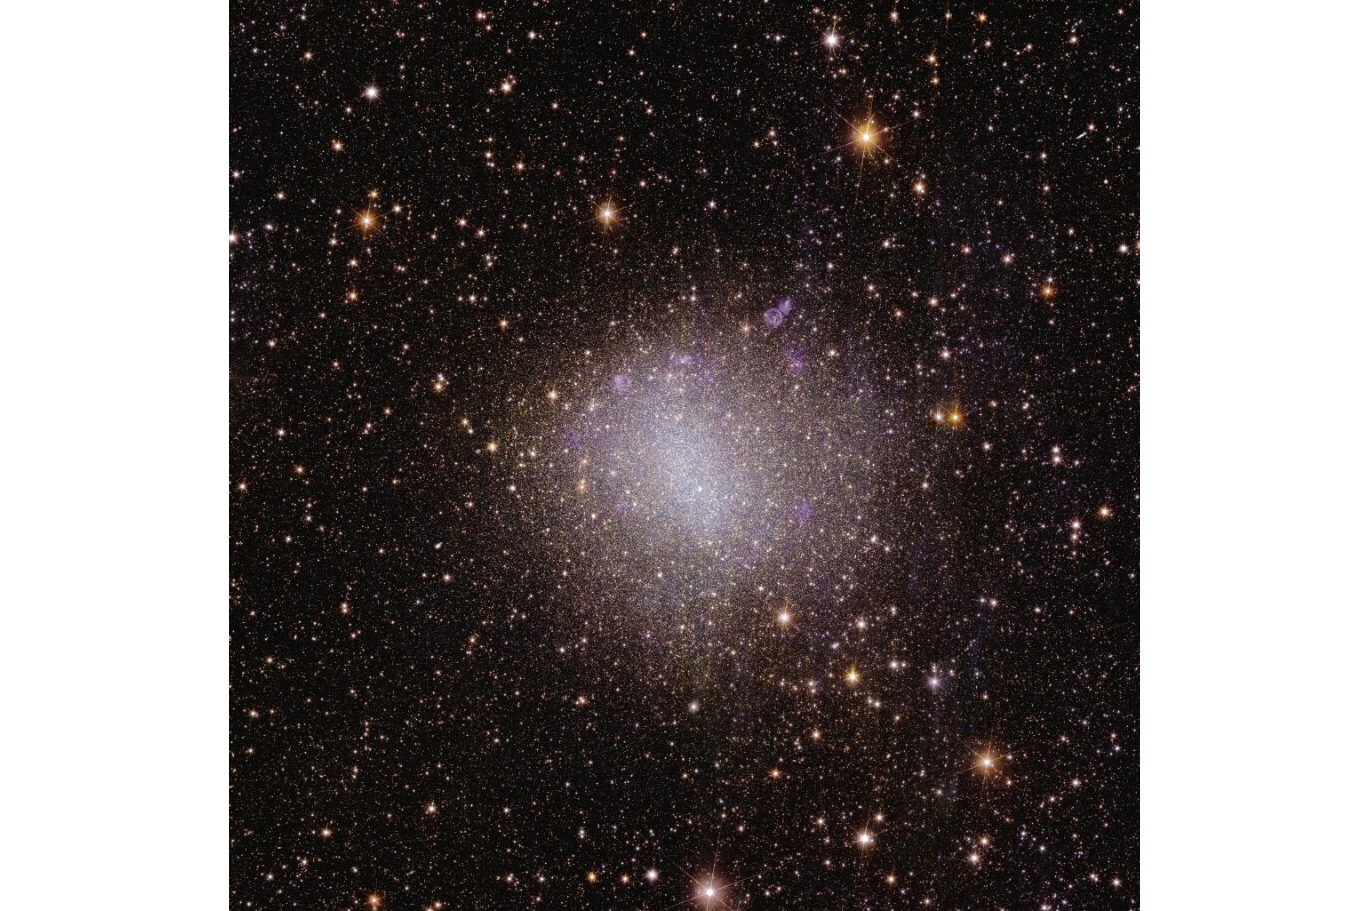 A sparkly pinkish and white blob of light in the center of the image, surrounded by a millions of light specks representing distant cosmic objects.